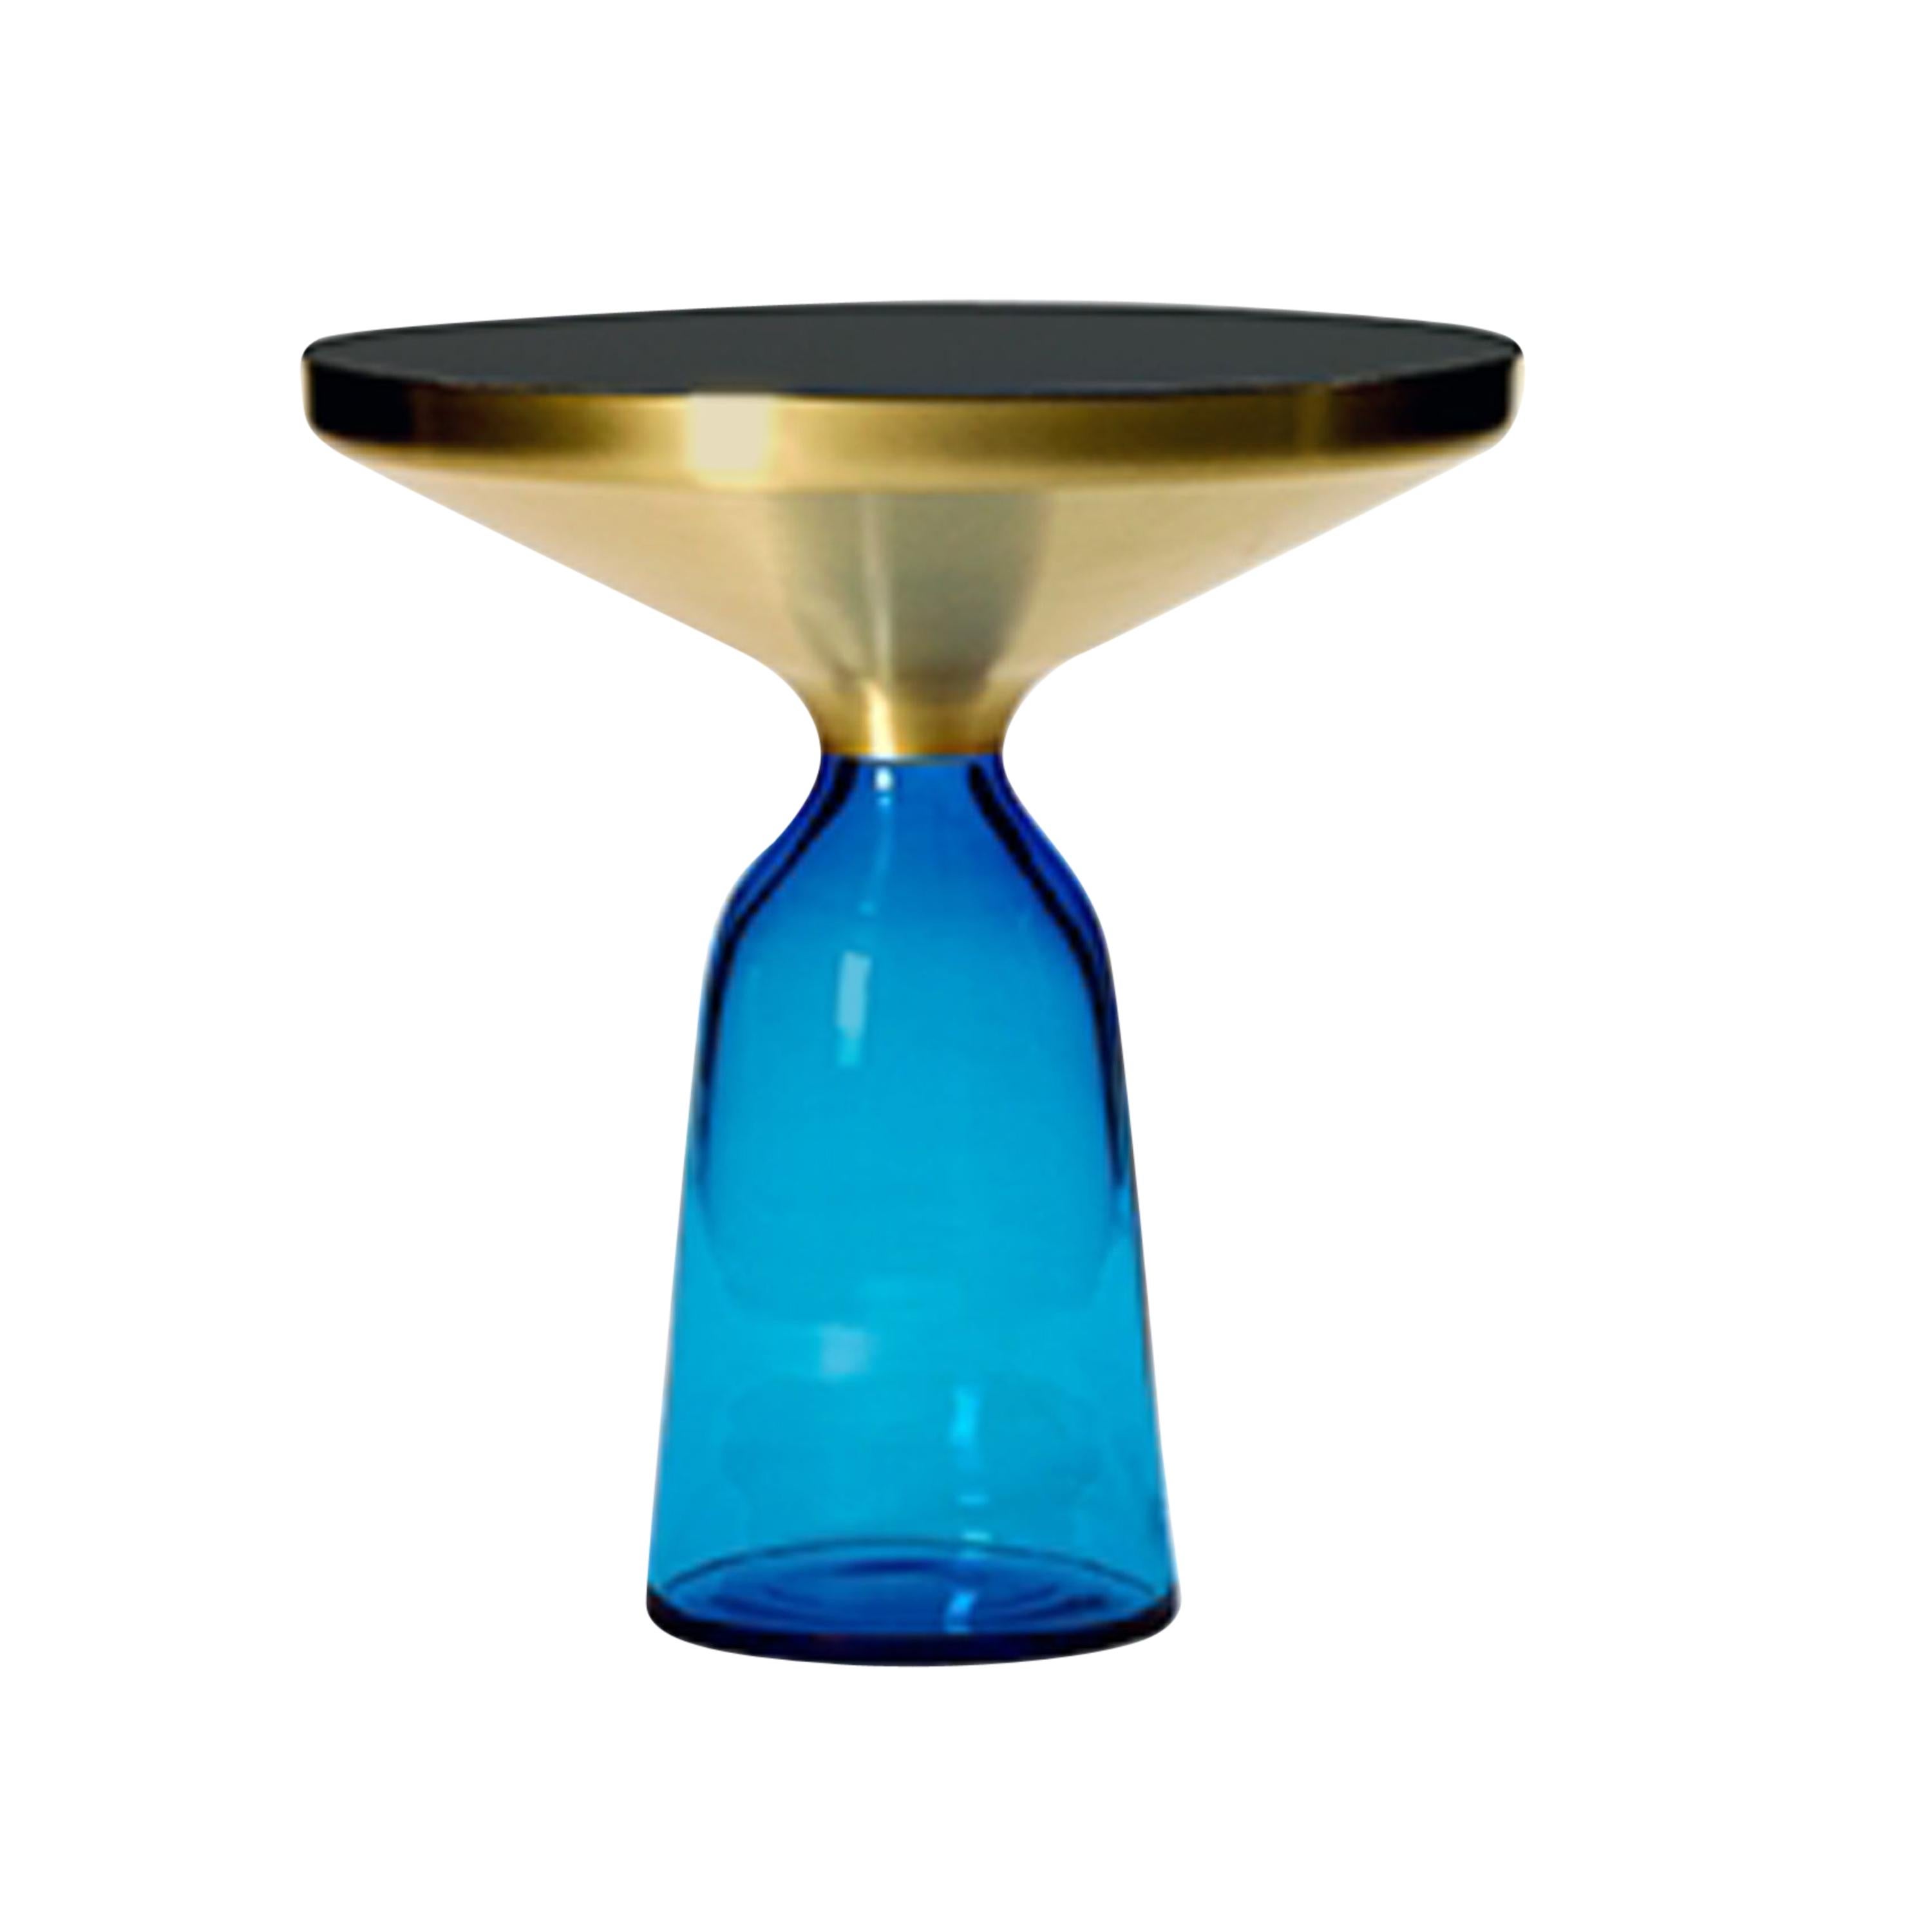 ClassiCon Bell Side Table in Brass and Sapphire Blue by Sebastian Herkner